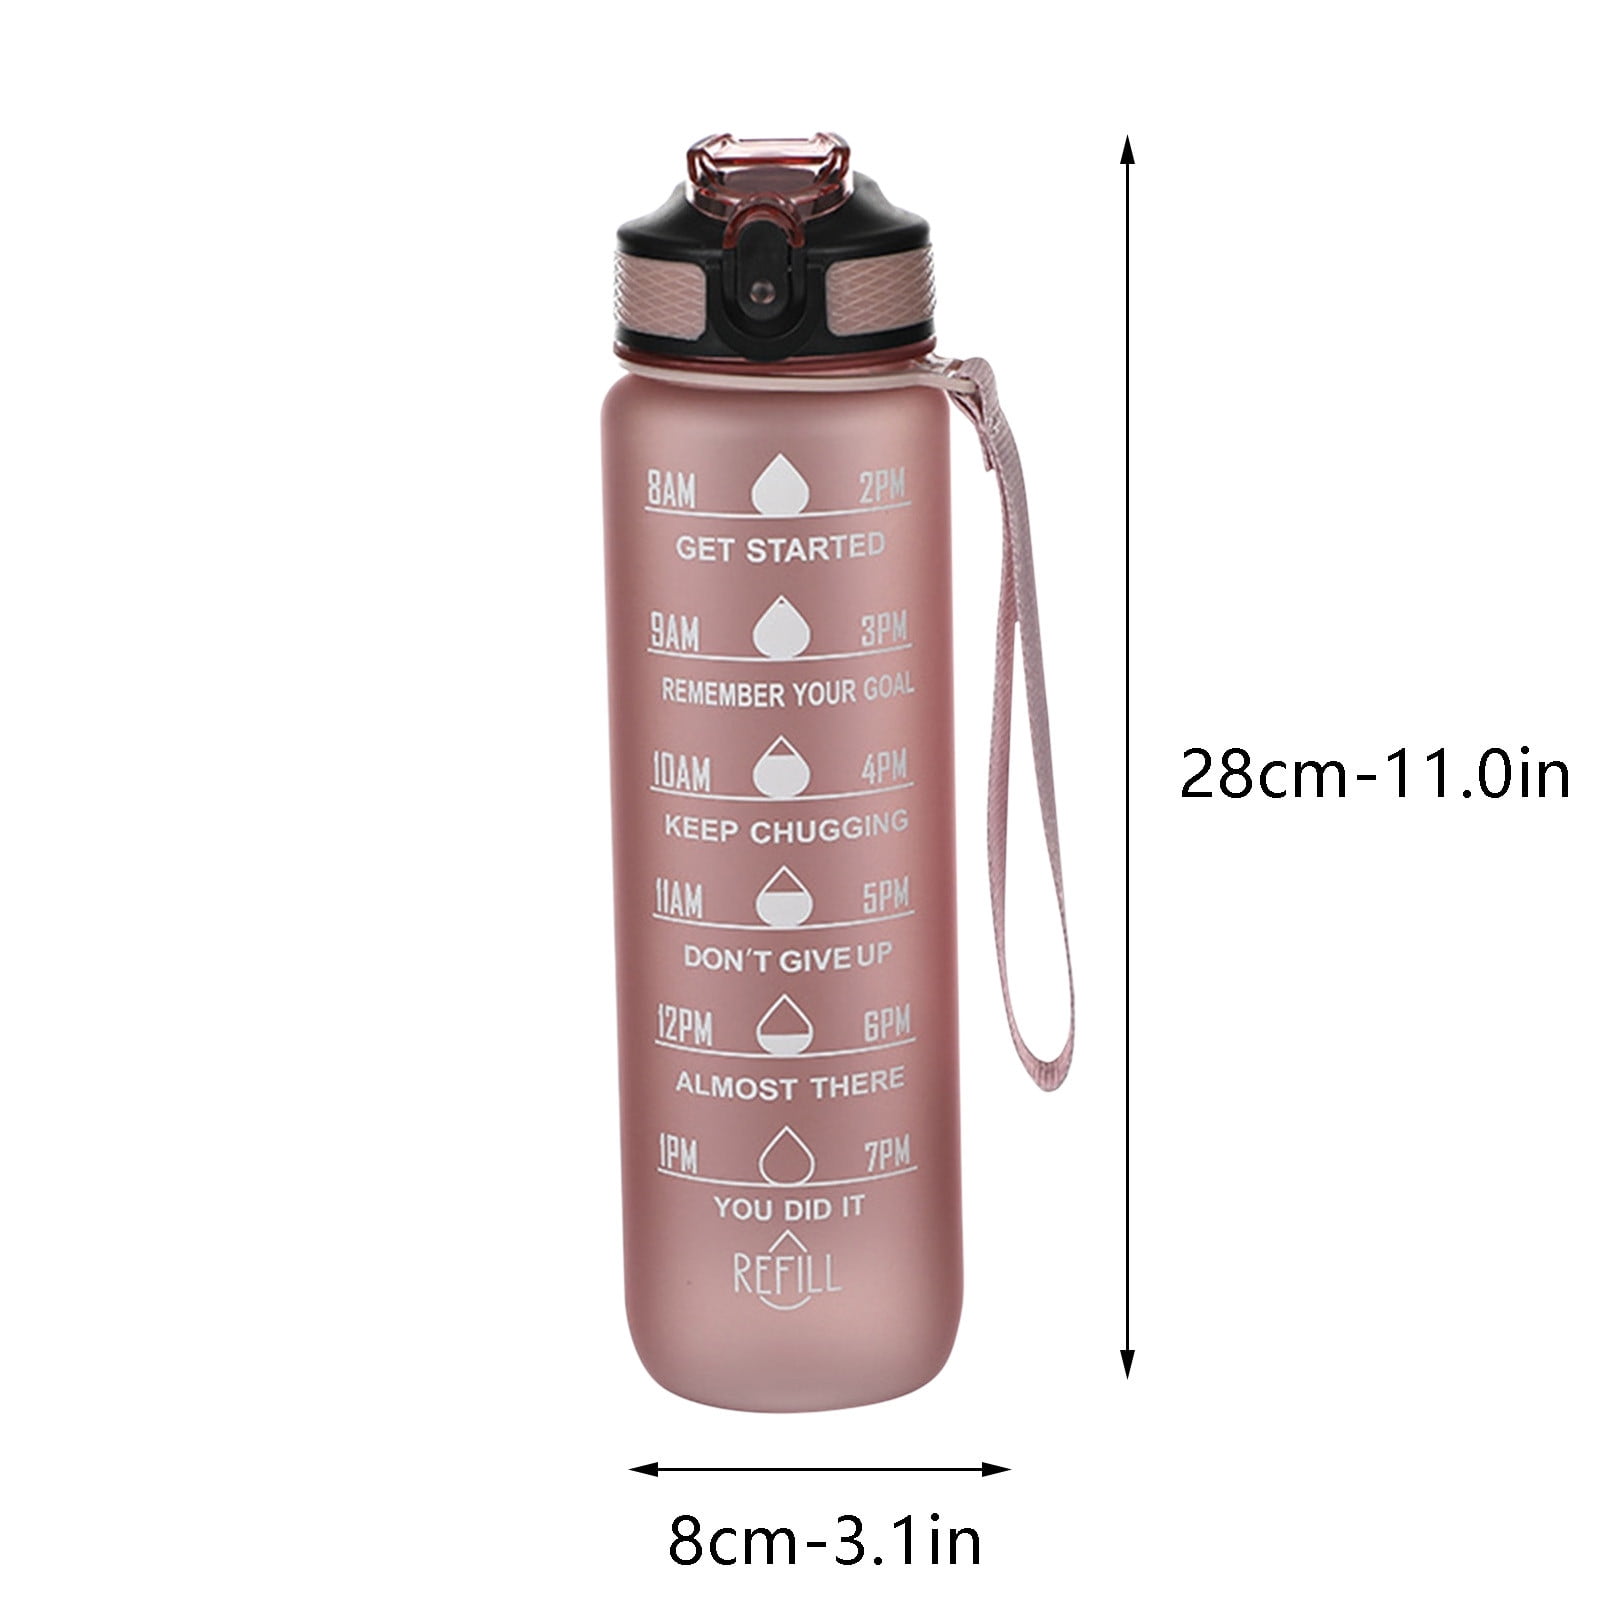 SDJMa BPA Free Plastic Water Bottles Large Sports Water Bottle Leakproof  lid Adults with Hydrating Reminder Motivational for Gym Outdoor Fitness